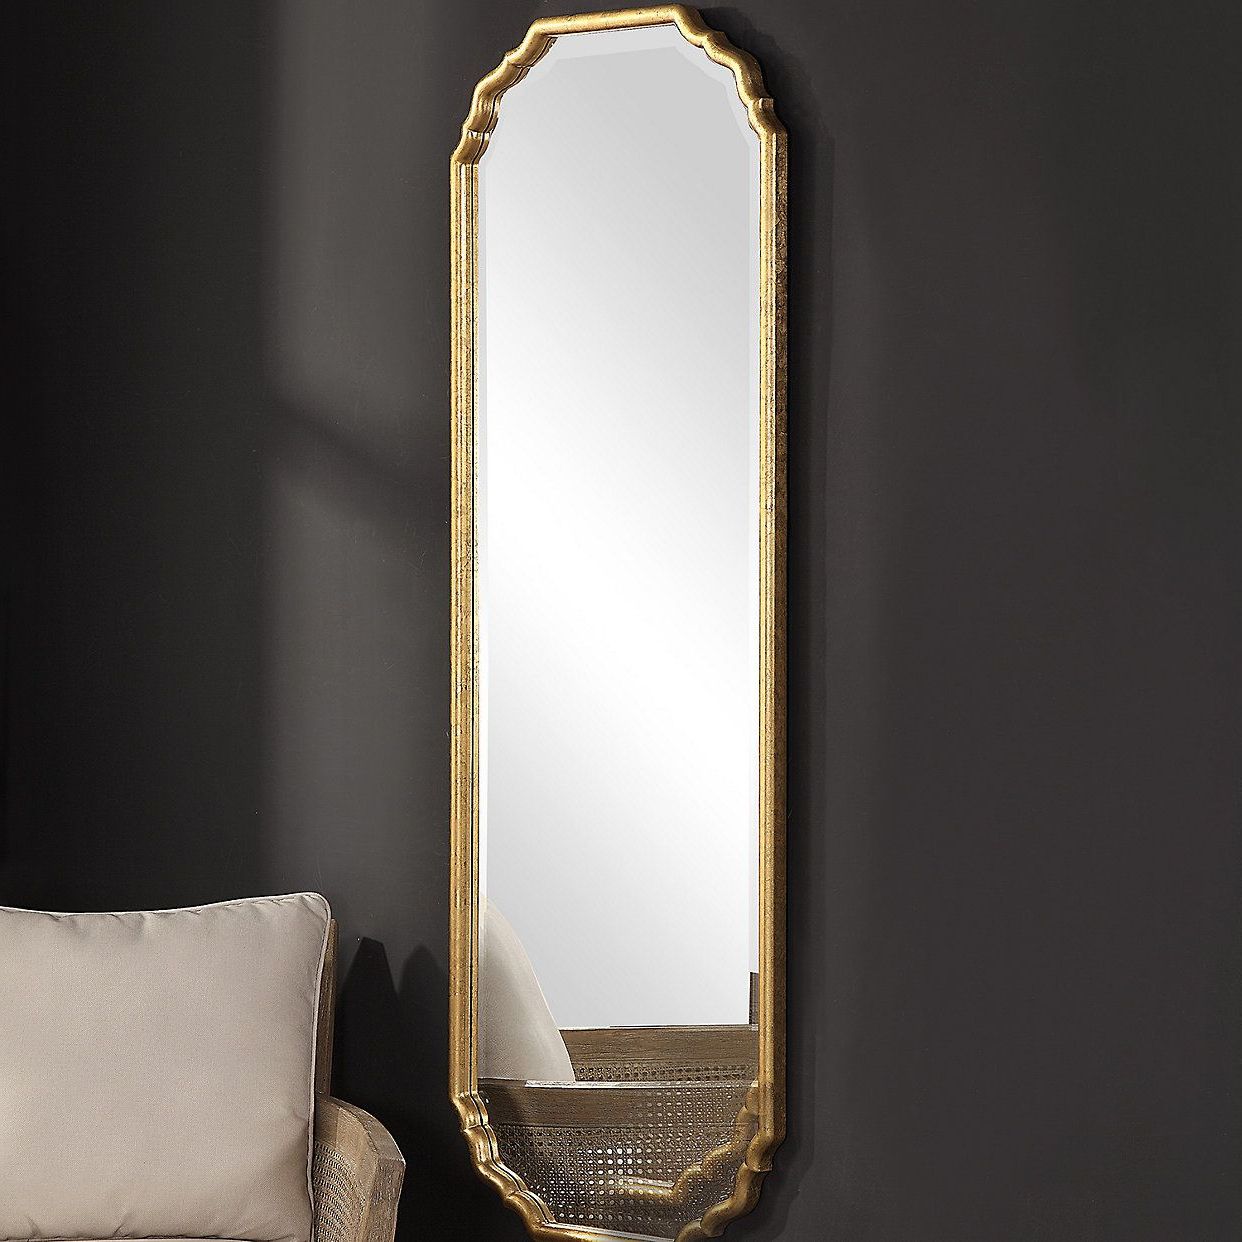 Gold Curved Wall Mirrors With Preferred Elegant Curved Corners Metallic Gold Leaf Finish Wall Mirror (View 10 of 15)